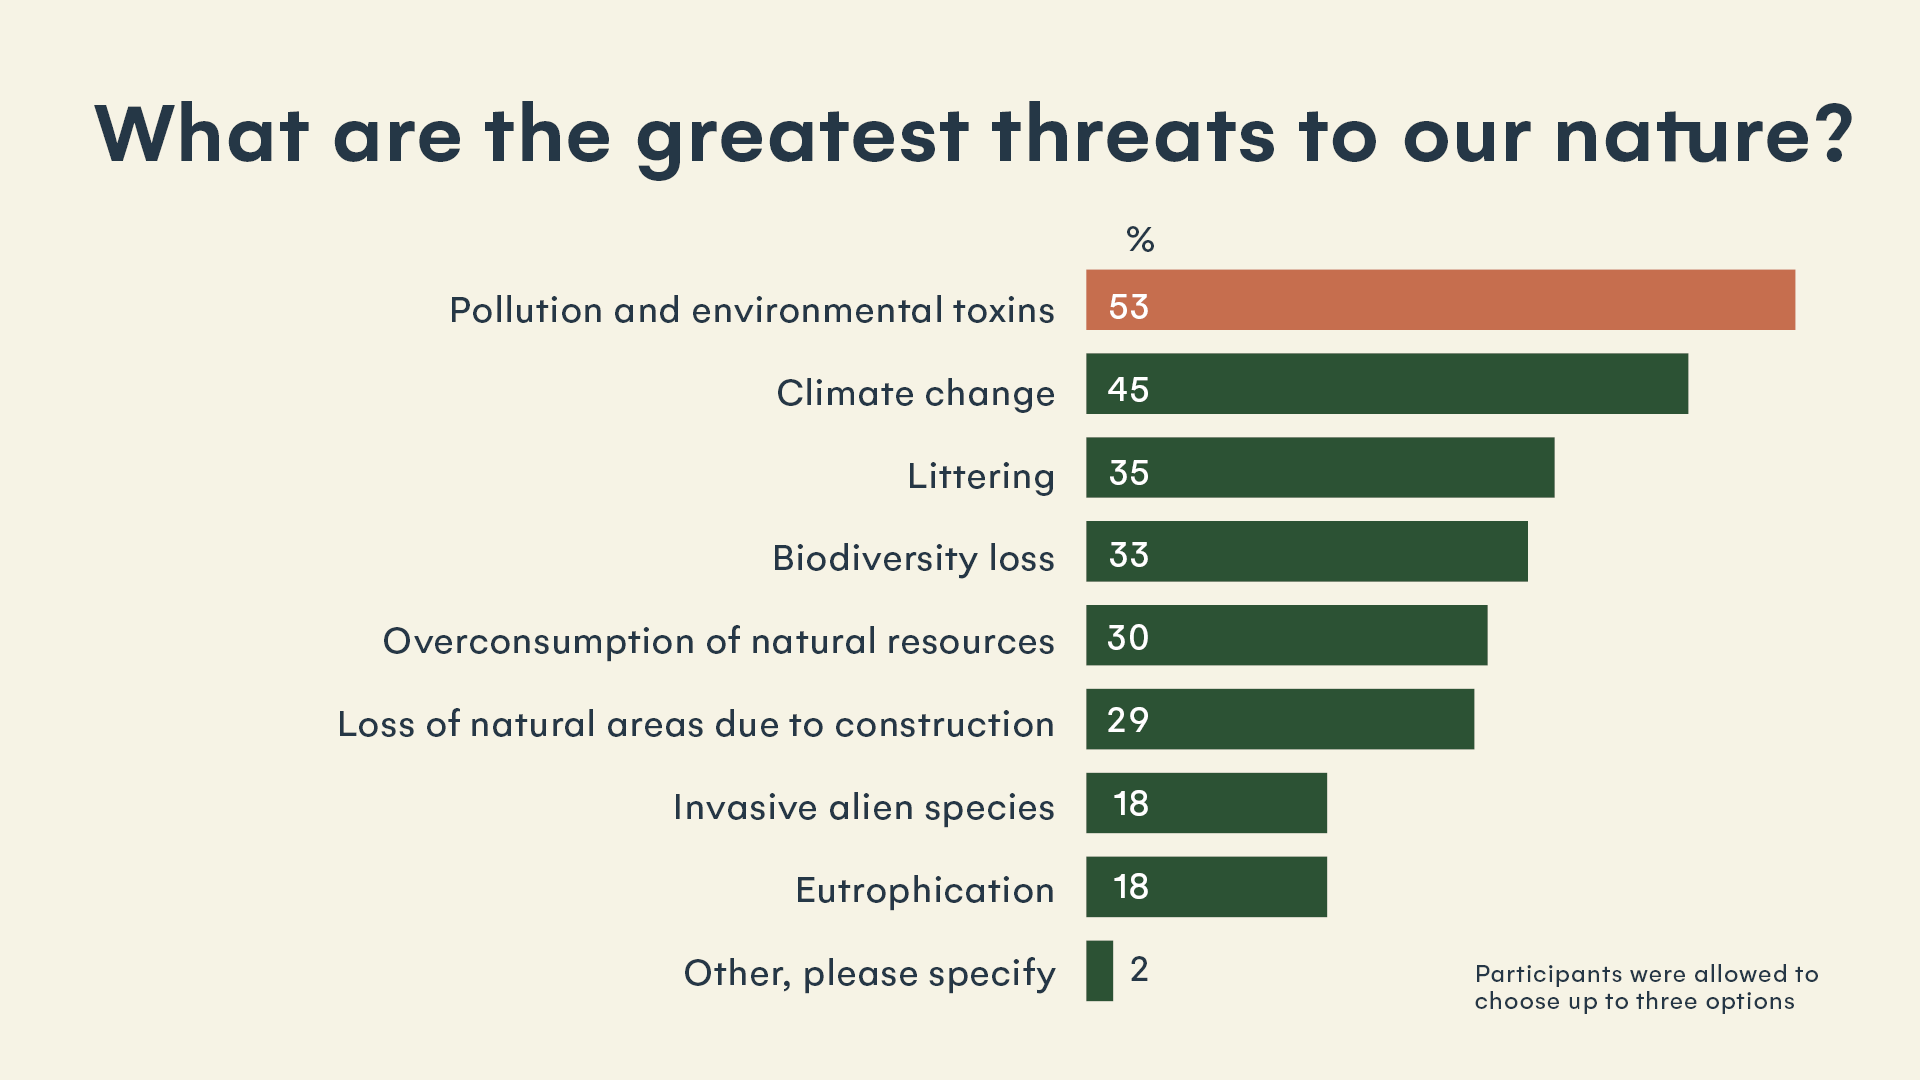 The respondents considered pollution and environmental toxins, climate change, littering and biodiversity loss to be the greatest threats to our nature.